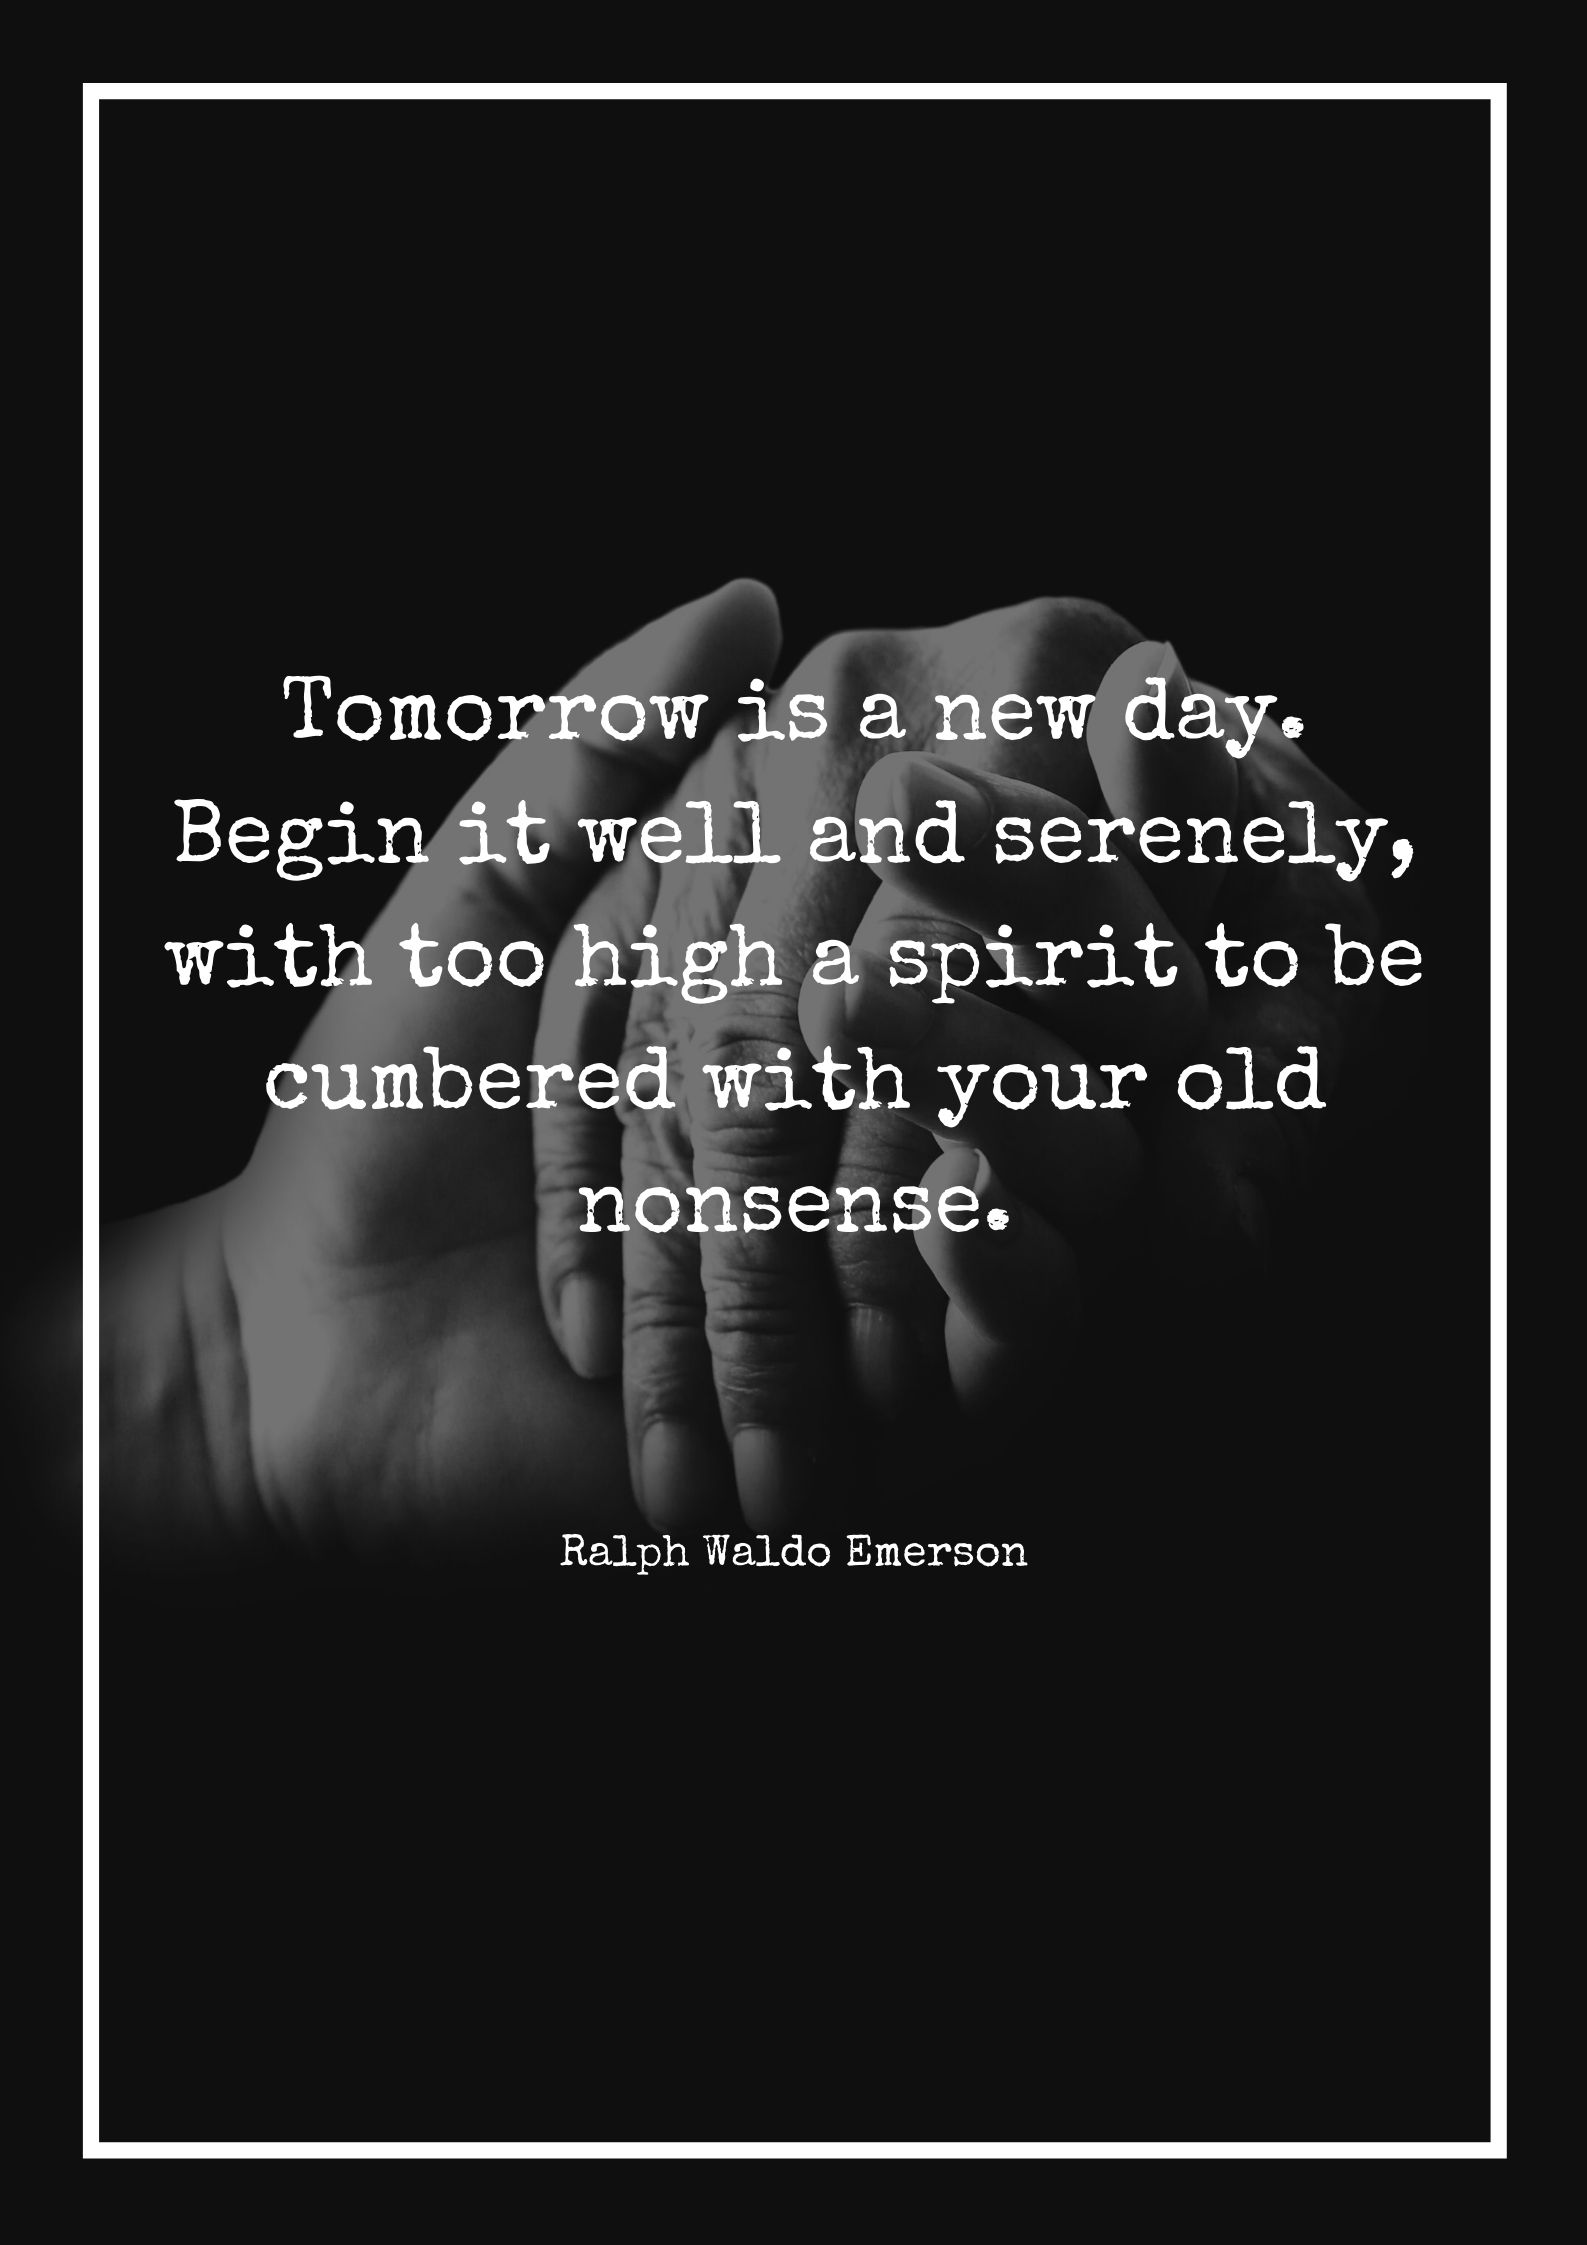 Tomorrow is a new day. Begin it well and serenely, with too high a spirit to be cumbered with your old nonsense.